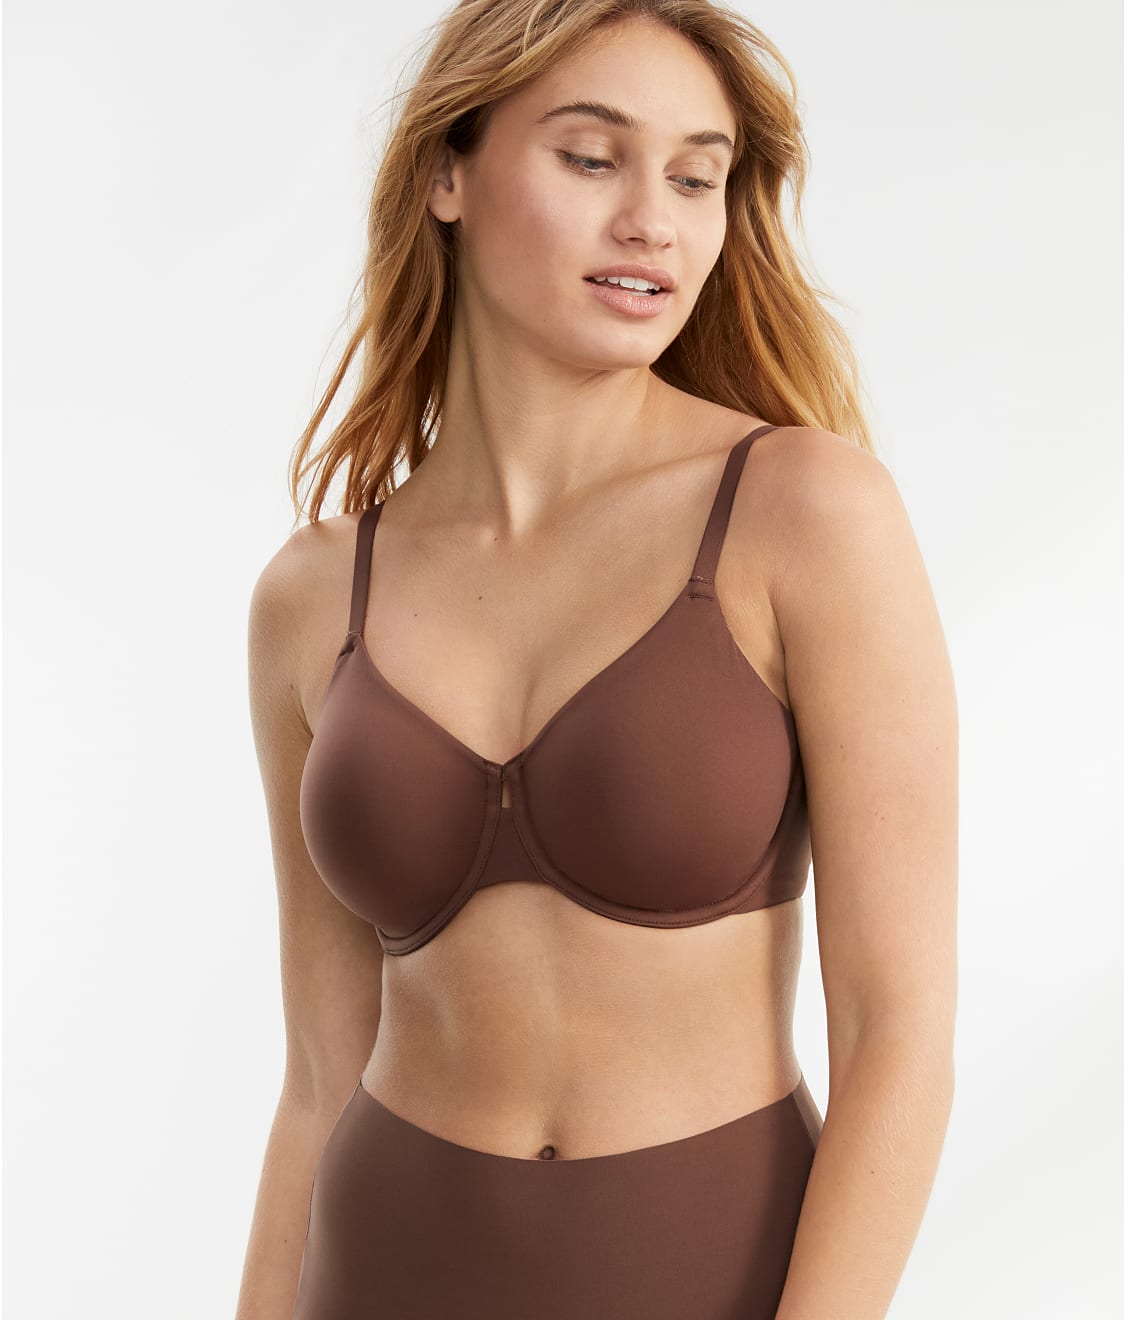 Bare: The Absolute Minimizer A10165